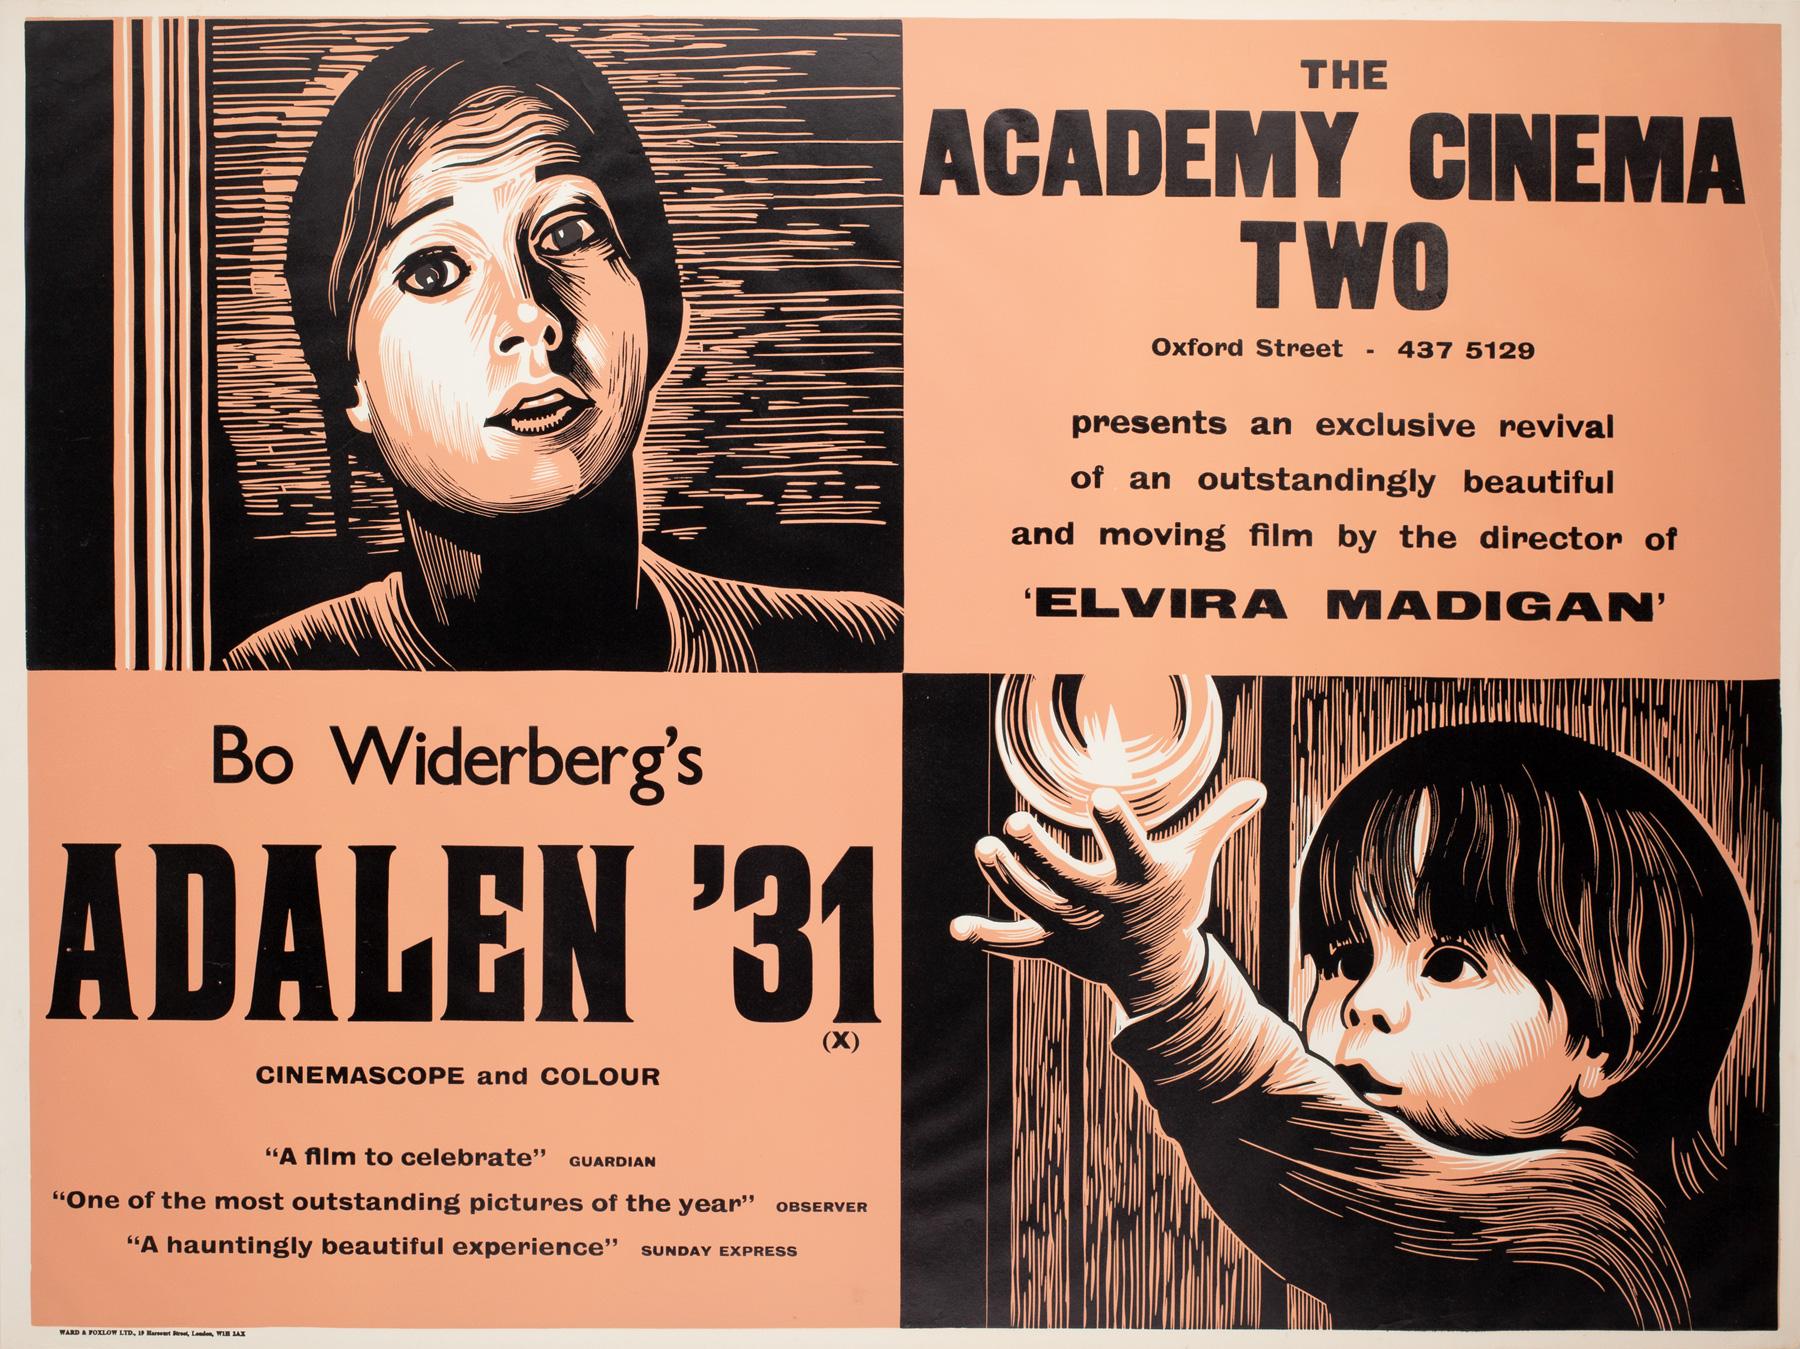 1970s Academy Cinema film poster for Bo Widerberg's Adalen '31 featuring a striking design by Peter Strausfeld.

Cologne born Strausfeld came to England in 1938. Whilst interned on the Isle of Man during the Second World War, he developed a close